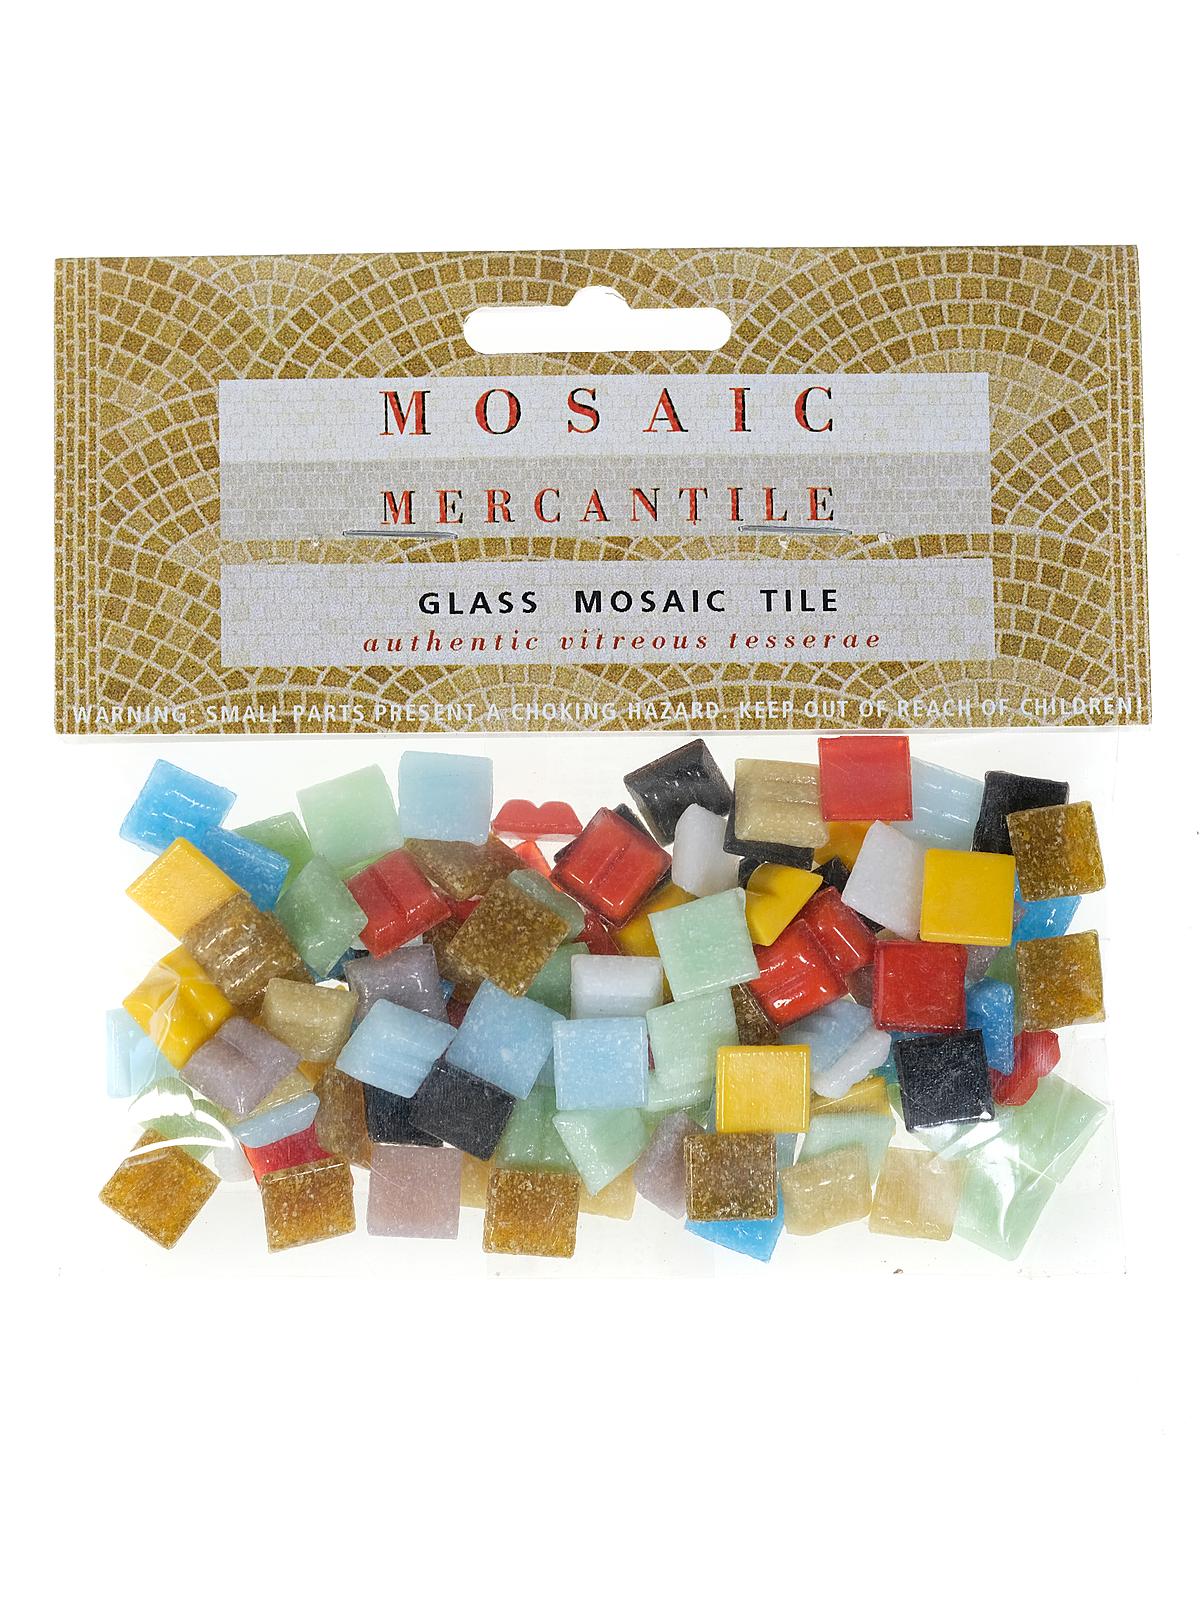 Solid Color Vitreous Glass Mosaic Tile Assorted 3 8 In. 1 6 Lb. Bag